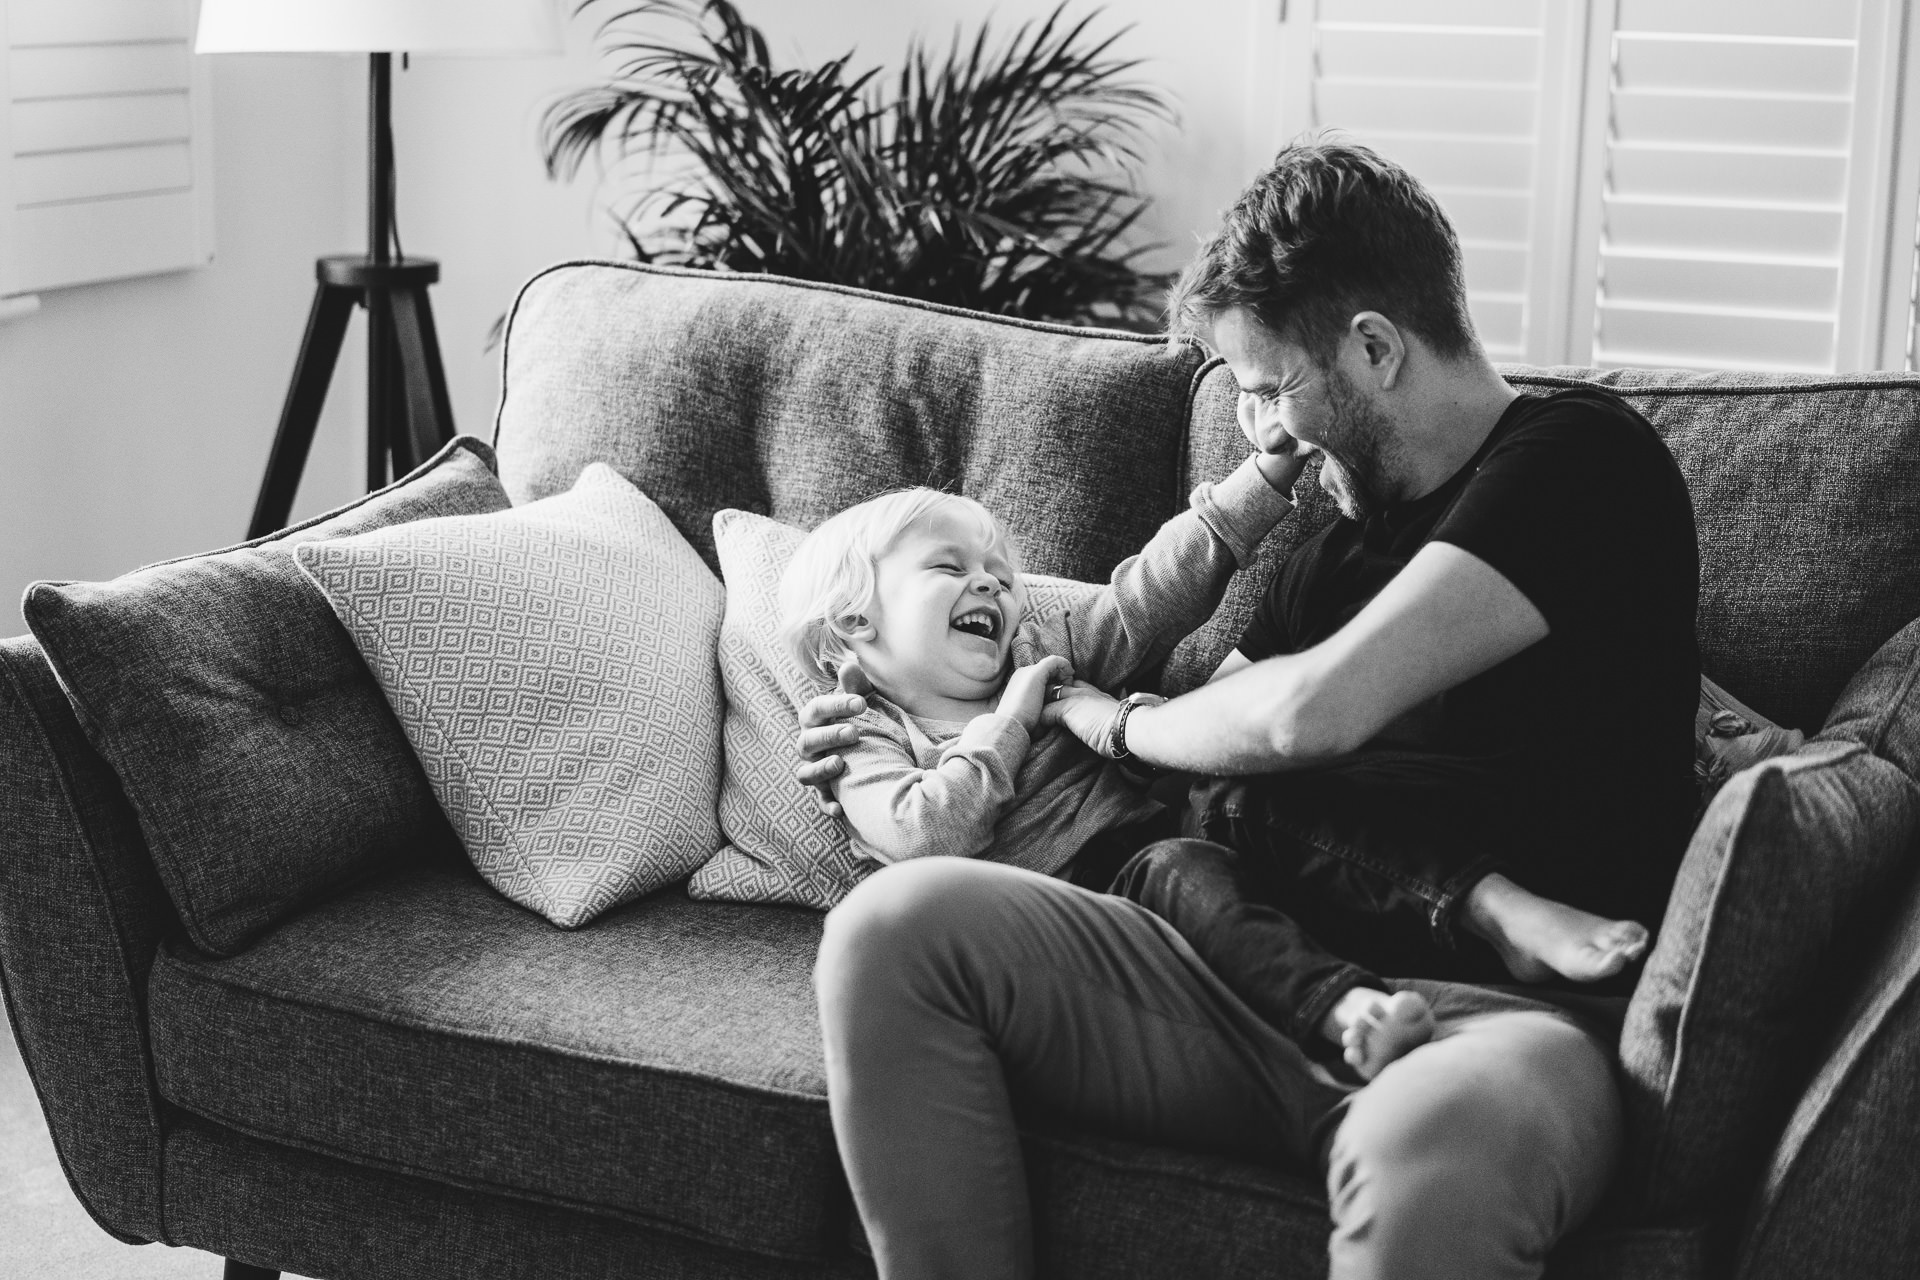 Relaxed Dorset family photography, a Dad and son playing on a sofa together